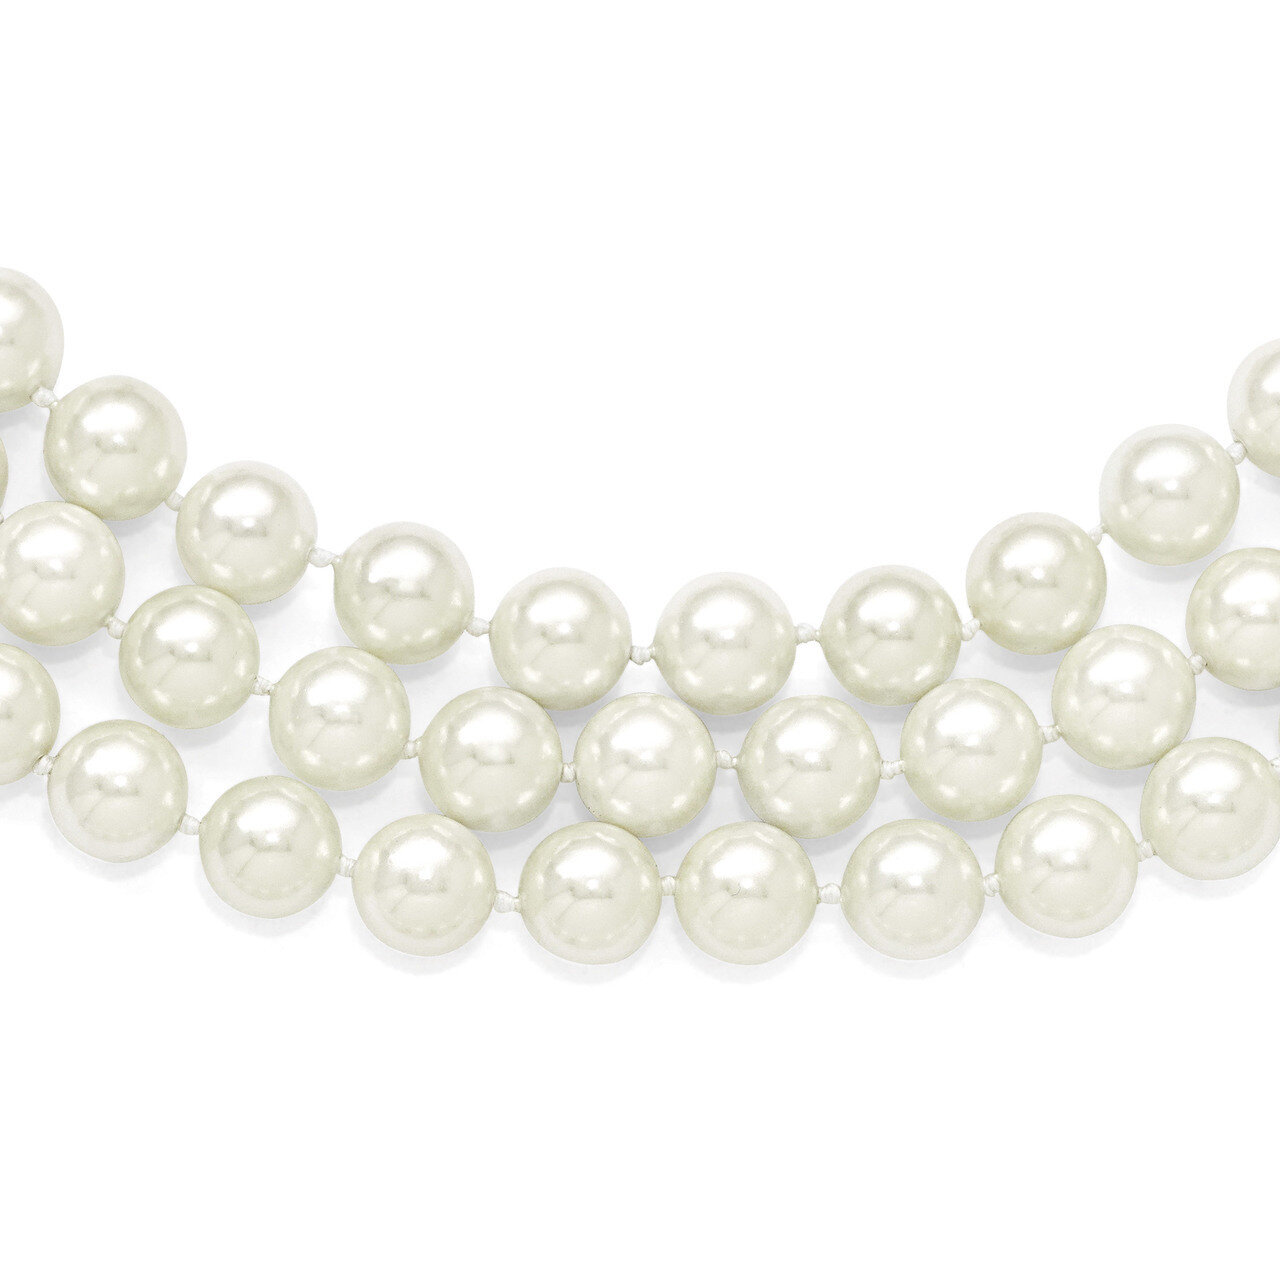 3 Row 10-11Mm White Shell Bead Necklace Sterling Silver QMJN310W-18